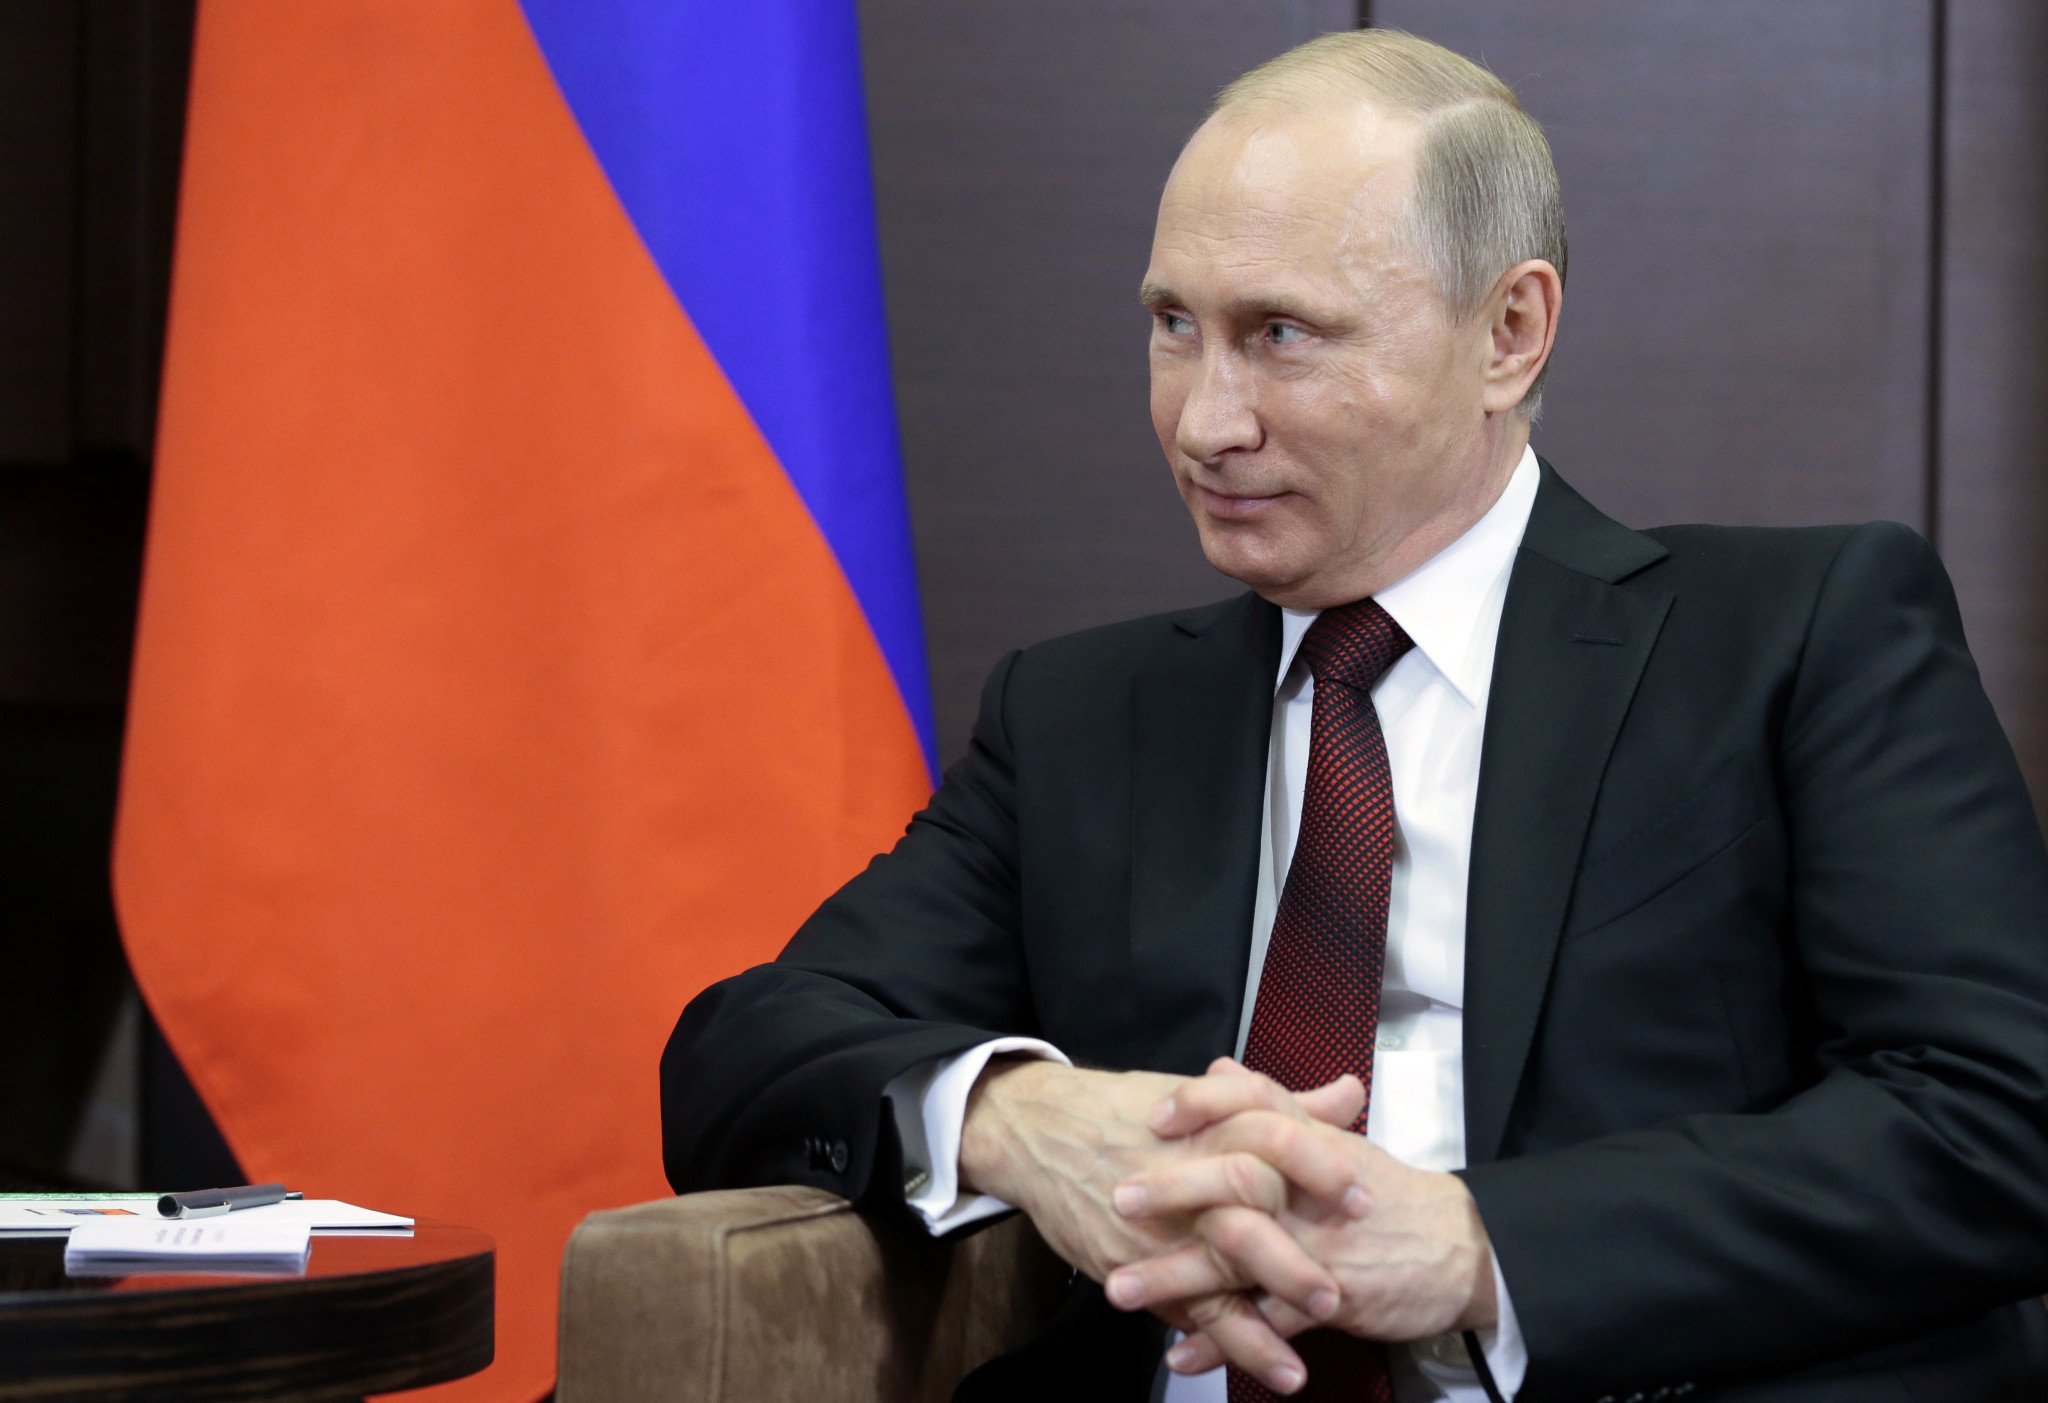 Putin reveals he ordered “hijacked” plane targeting Sochi 2014 Opening Ceremony to be shot down